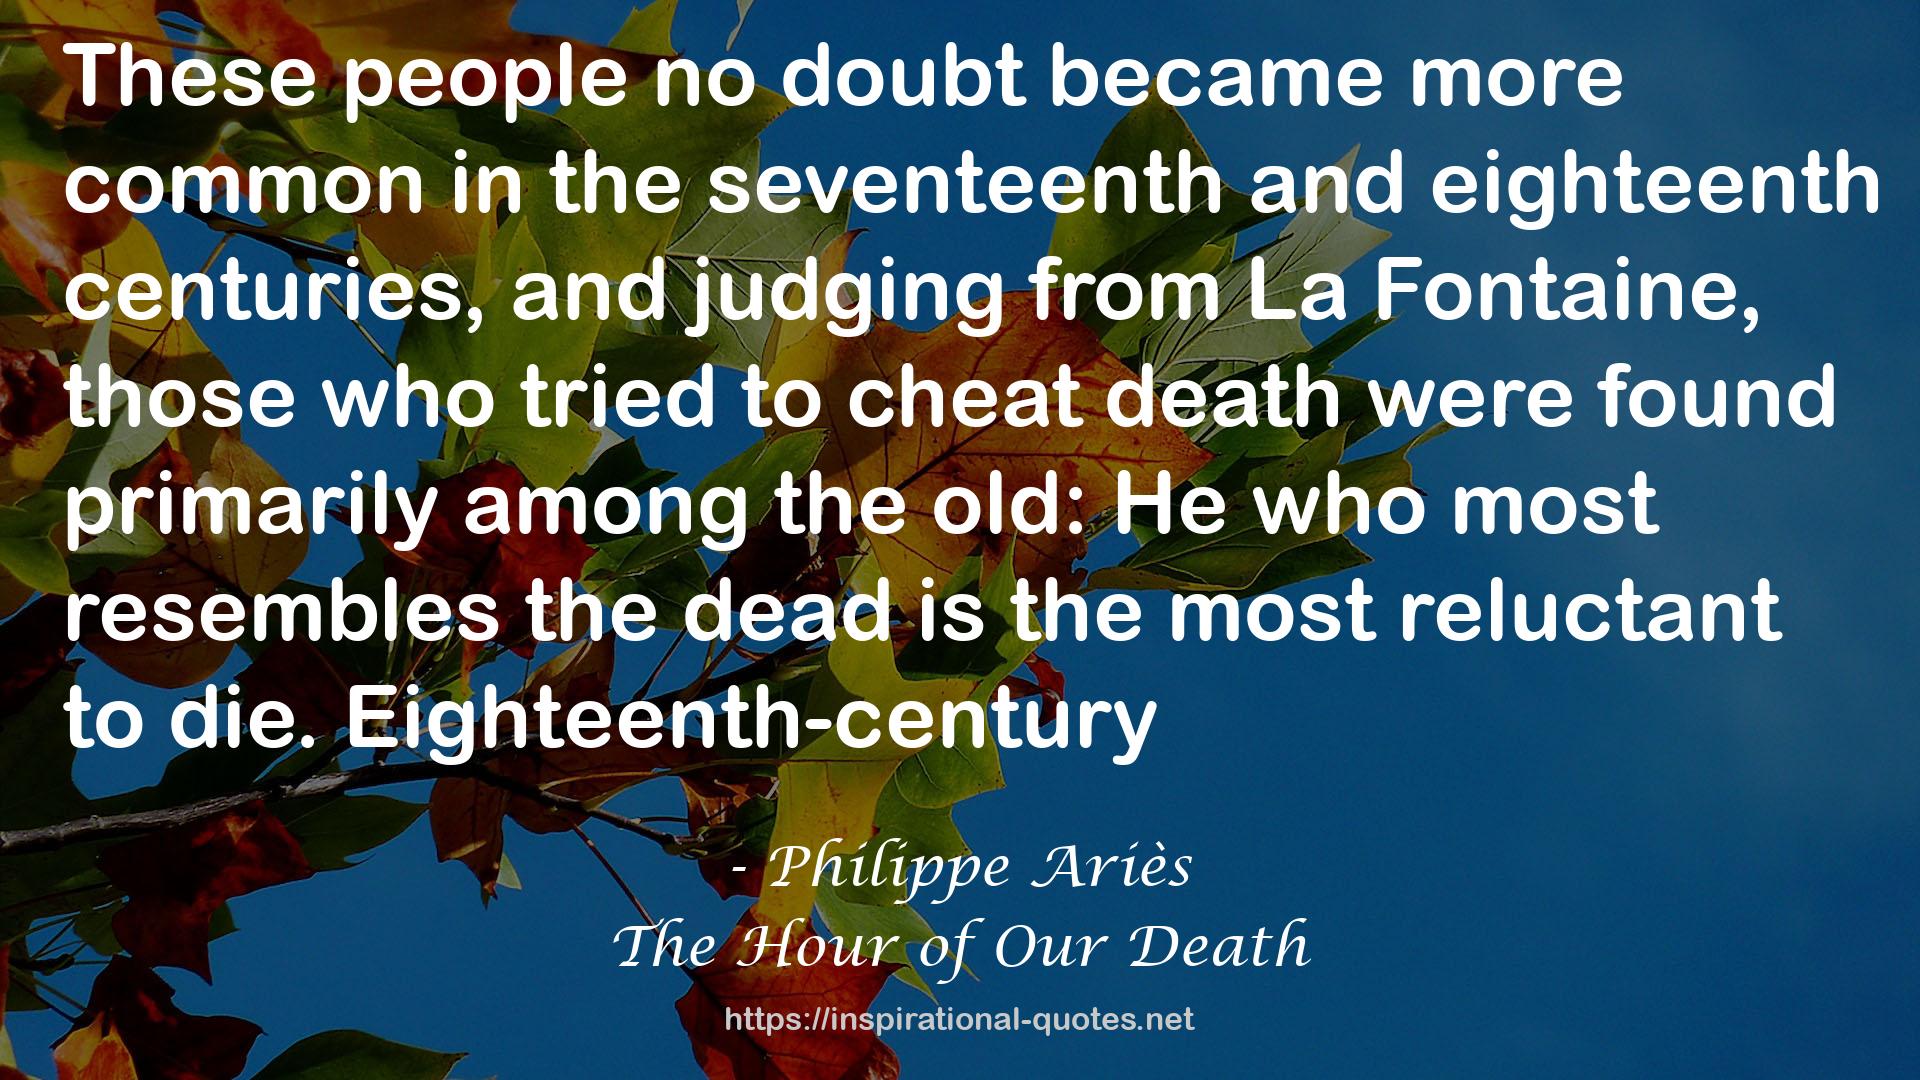 The Hour of Our Death QUOTES